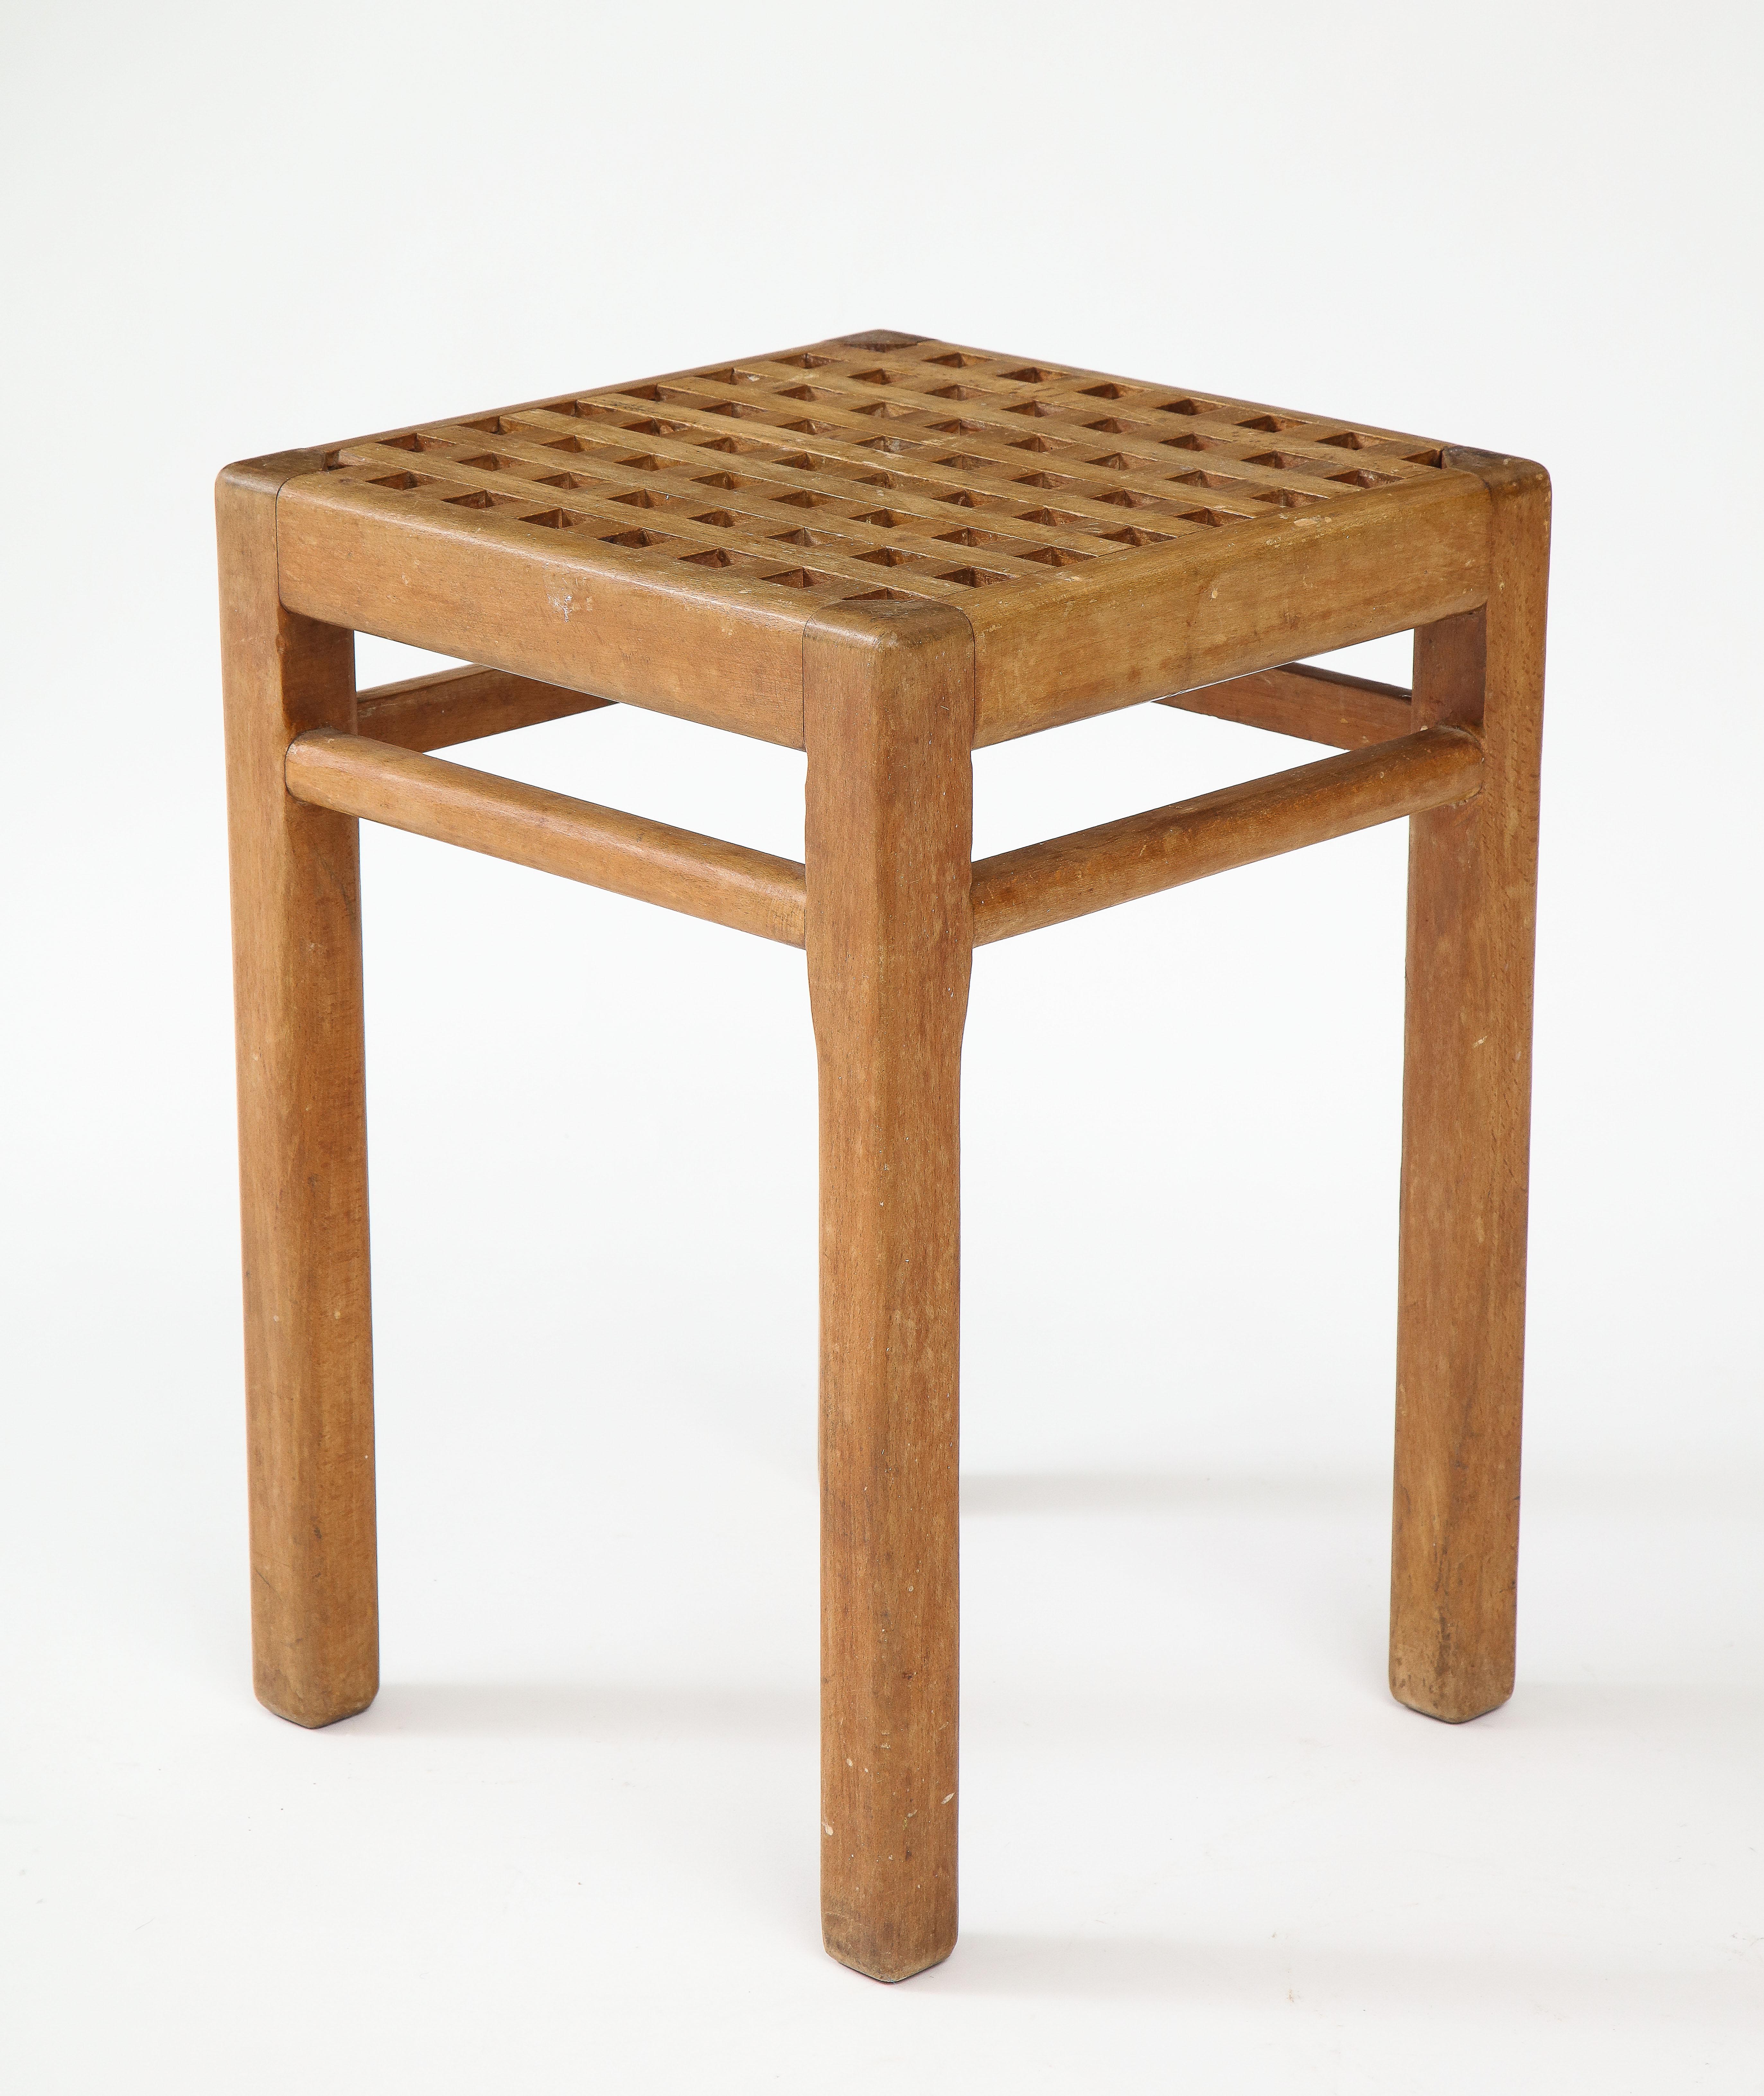 Hand-Crafted René Gabriel Table/Stool, France, c. 1940